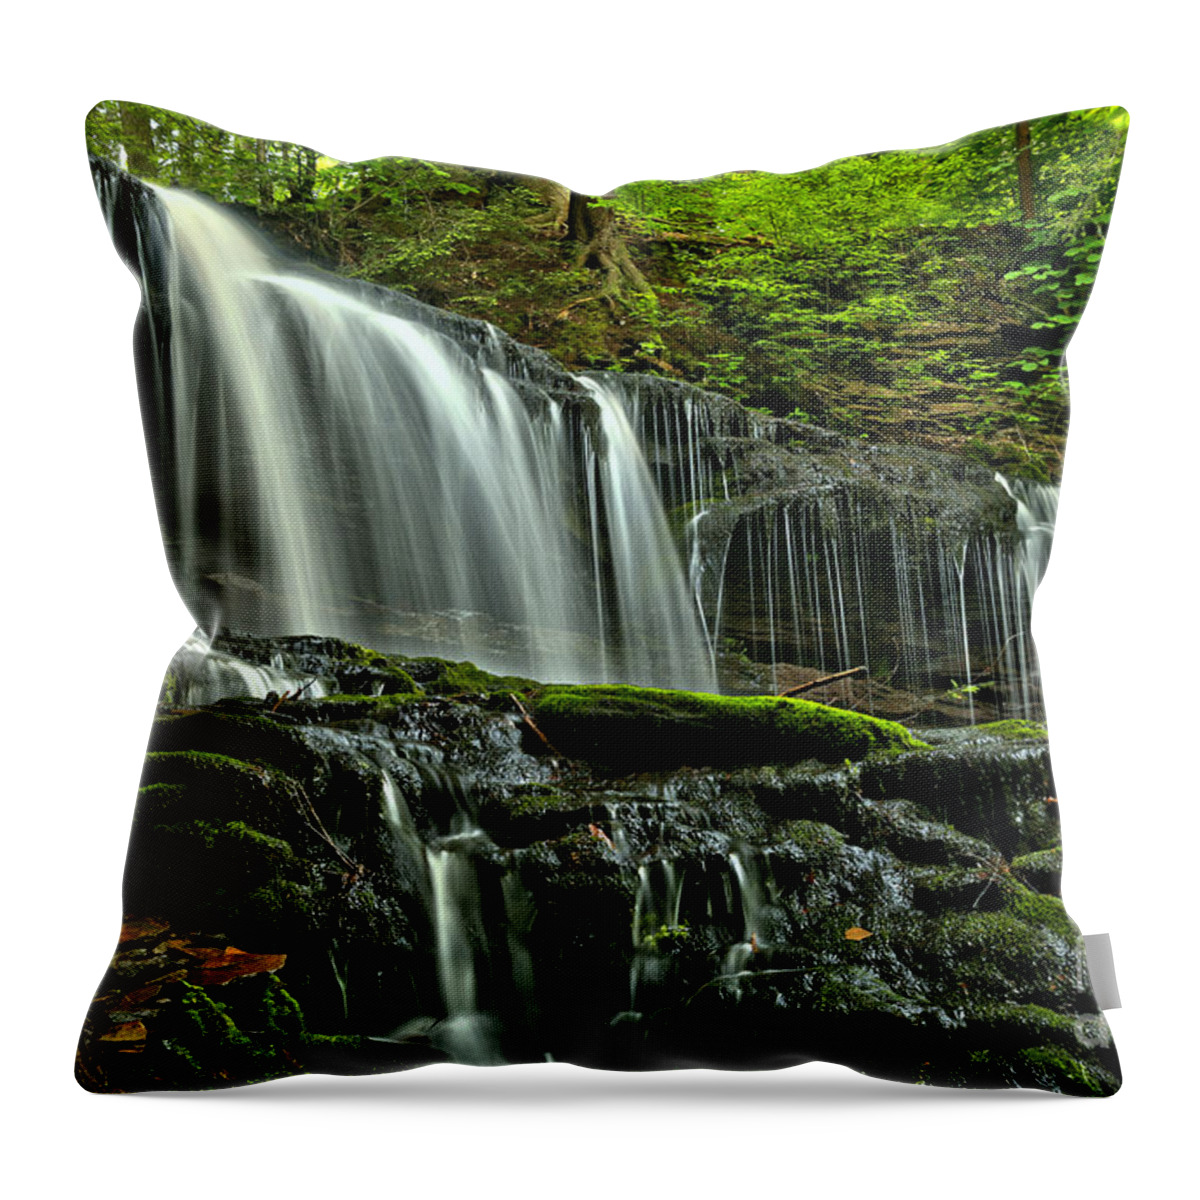 Mohowak Falls Throw Pillow featuring the photograph Ricketts Glen Mohwak Streams by Adam Jewell